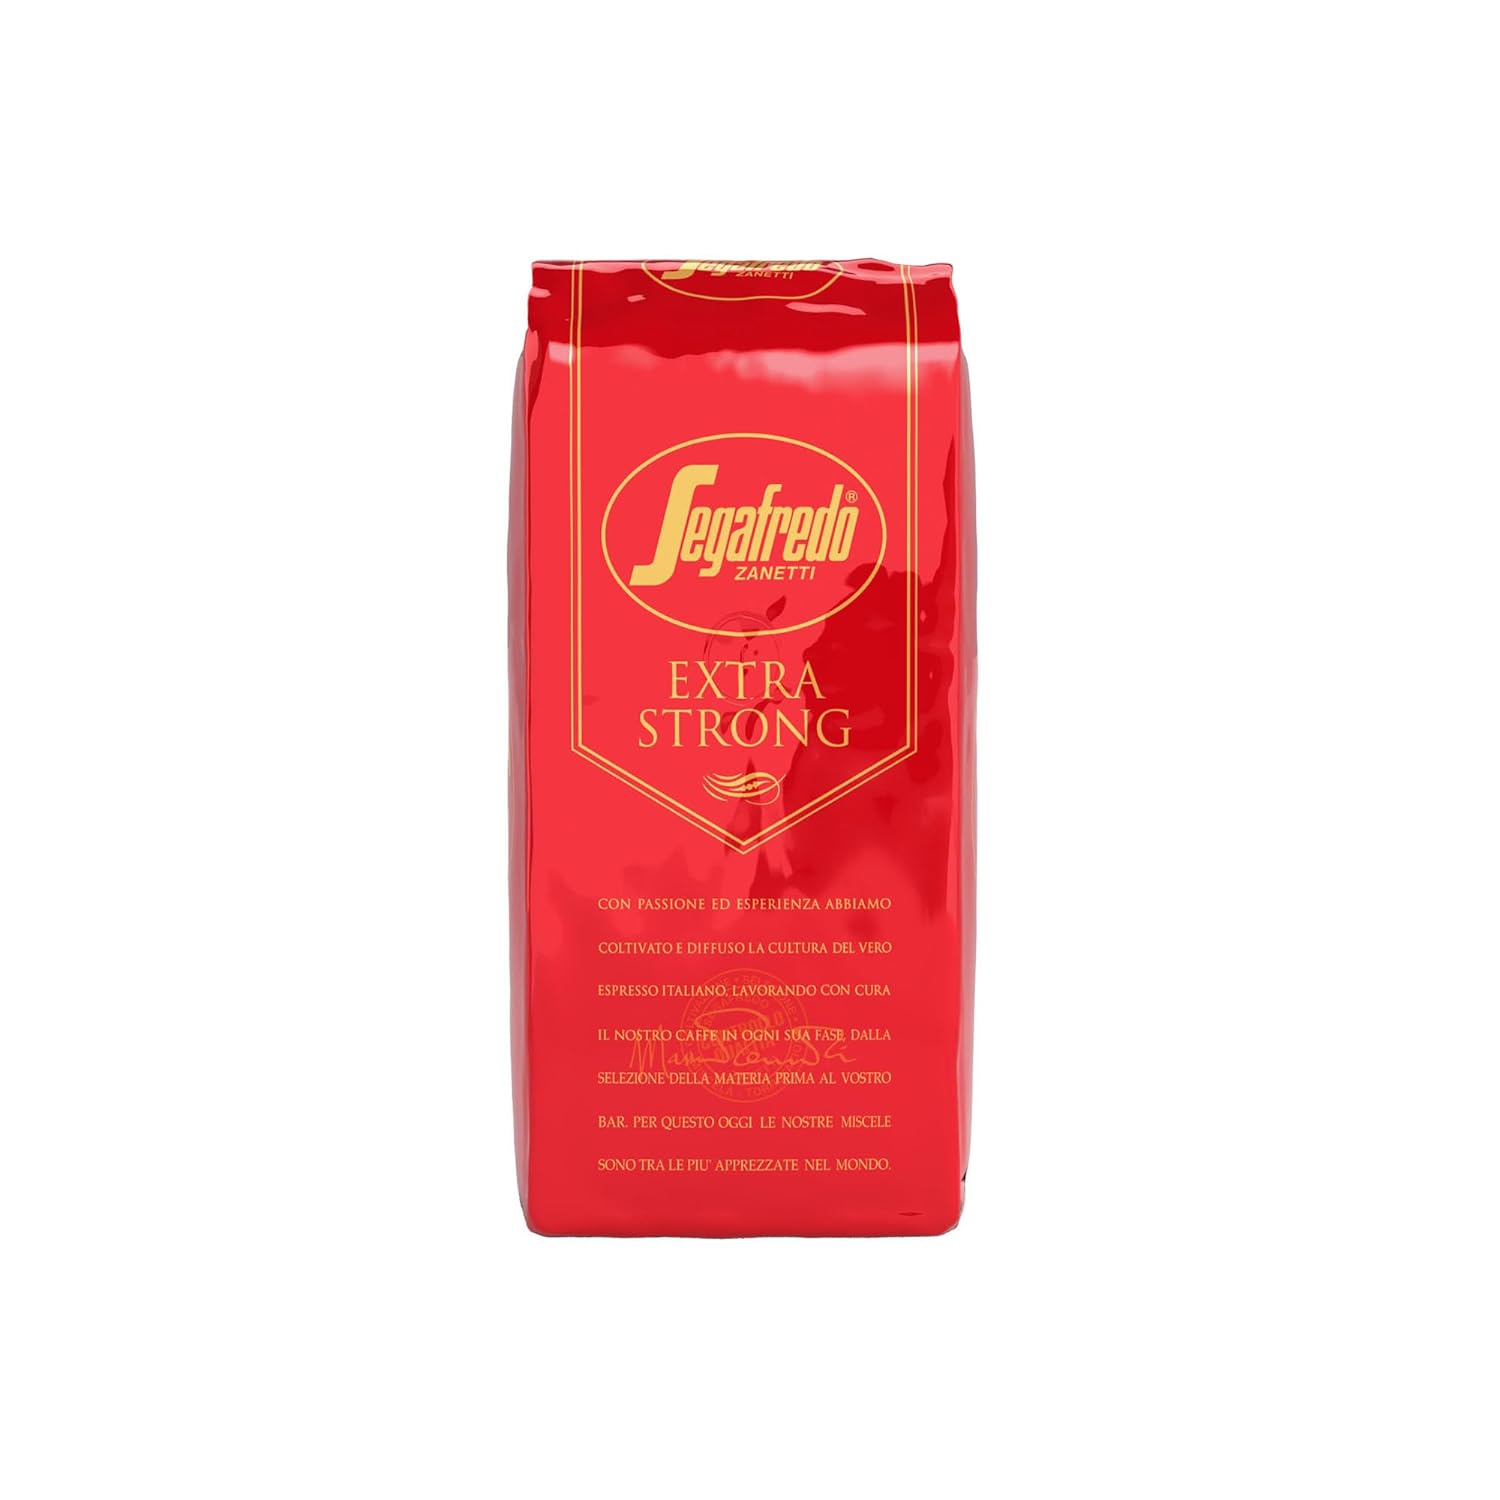 Segafredo Zanetti Extra Strong - Whole Bean (1 kg Pack), Suitable for All Italian Coffee Specialties, Coffee Beans with Original Italian Roasting, Strong and Full-bodied Flavor